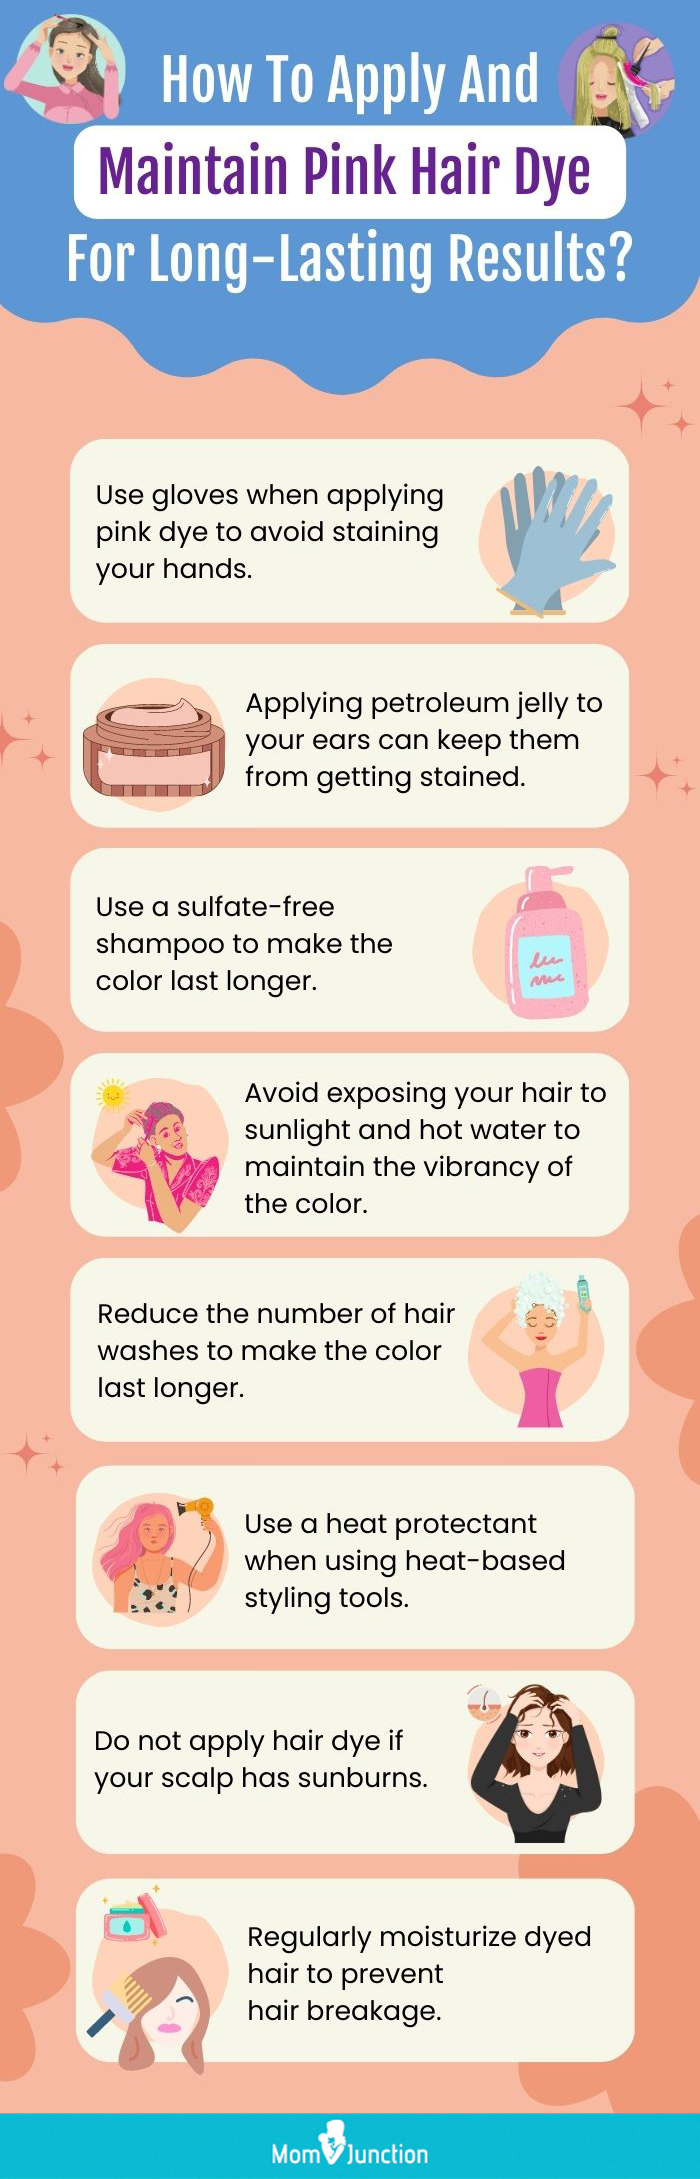 How To Apply And Maintain Pink Hair Dye For Long-Lasting Results